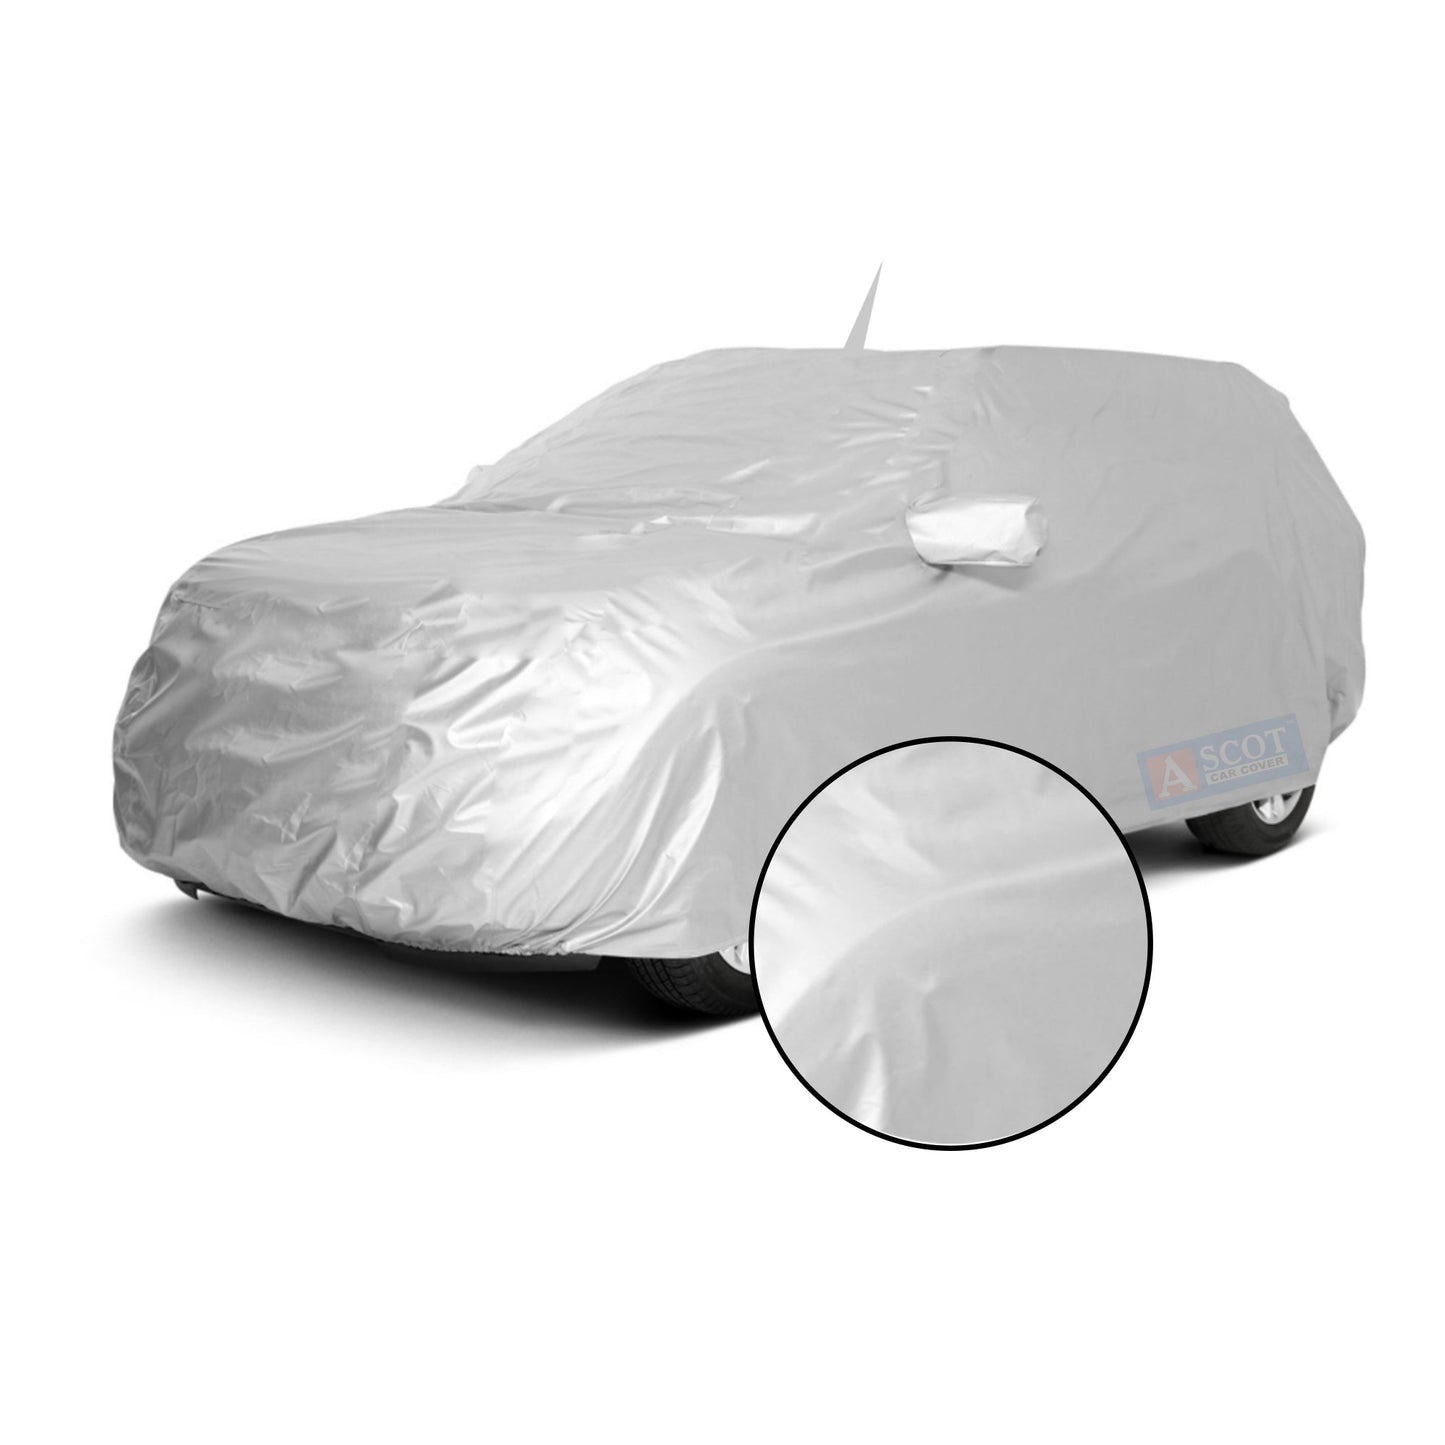 Ascot Mercedes-Benz A-Class Hatchback 2018-2023 Model Car Body Cover Dust Proof, Trippel Stitched